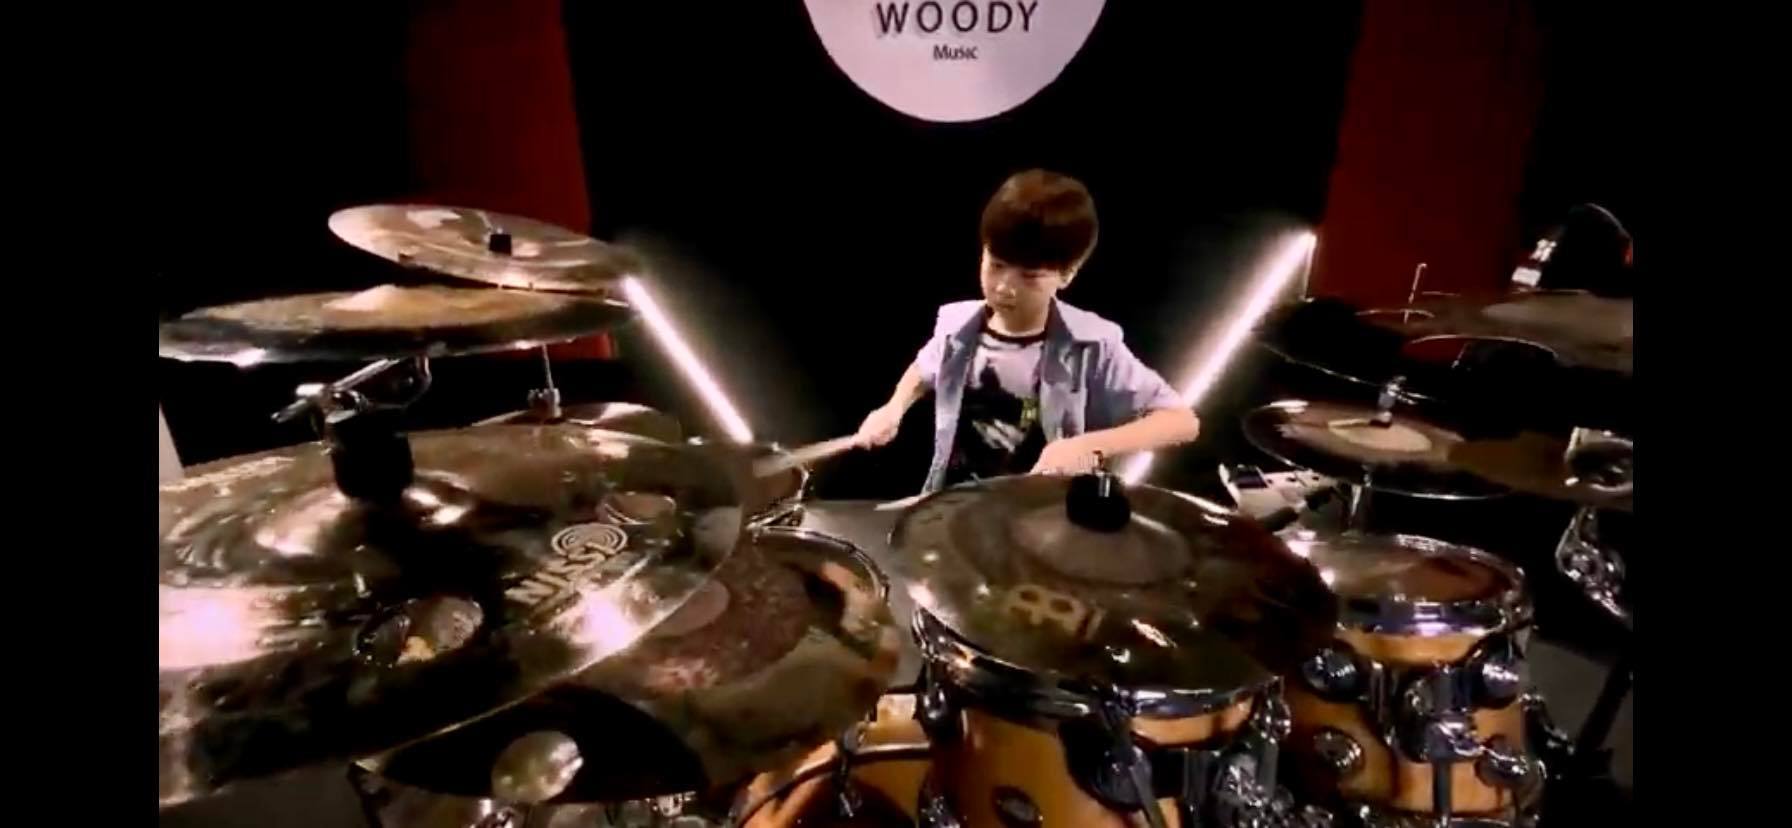 DREAM THEATER - PULL ME UNDER - DRUM COVER BY GIA HUY 10 YEARS OLD